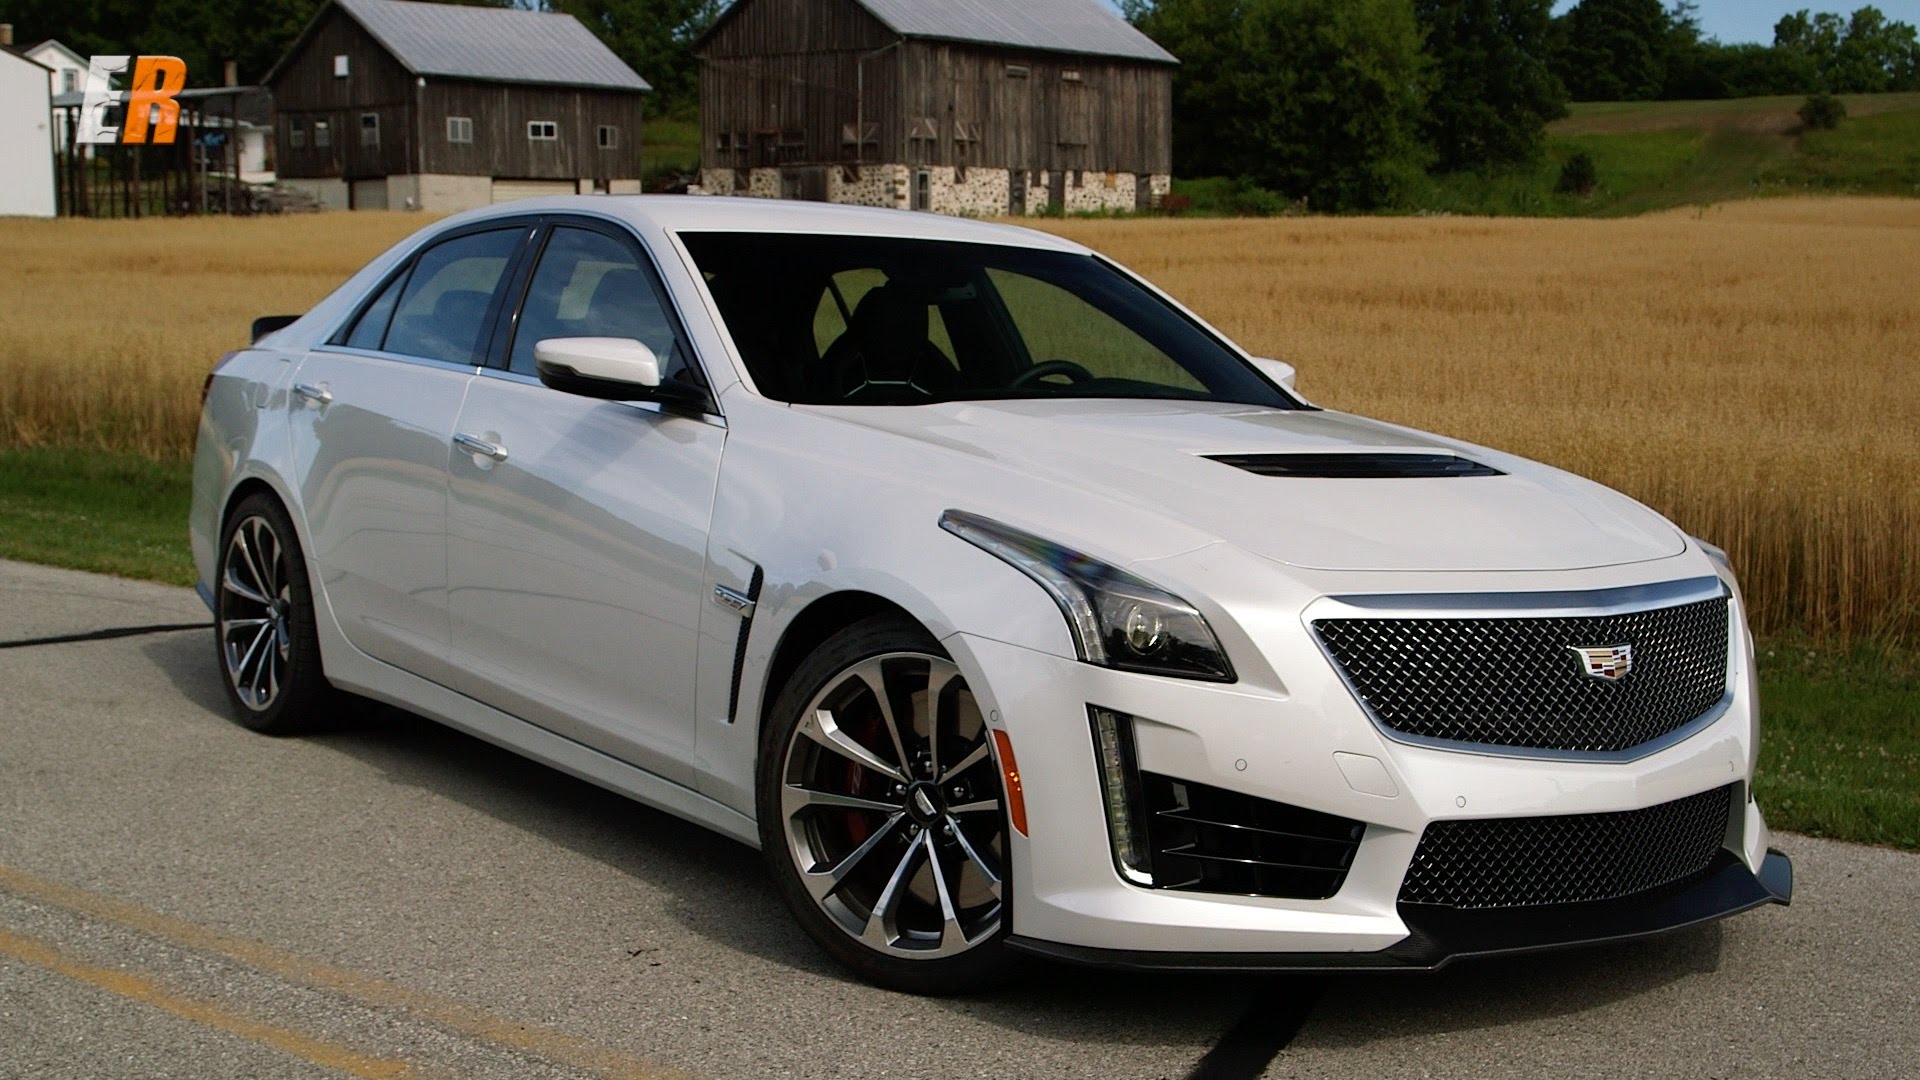 Amazing Cadillac CTS-V Pictures & Backgrounds